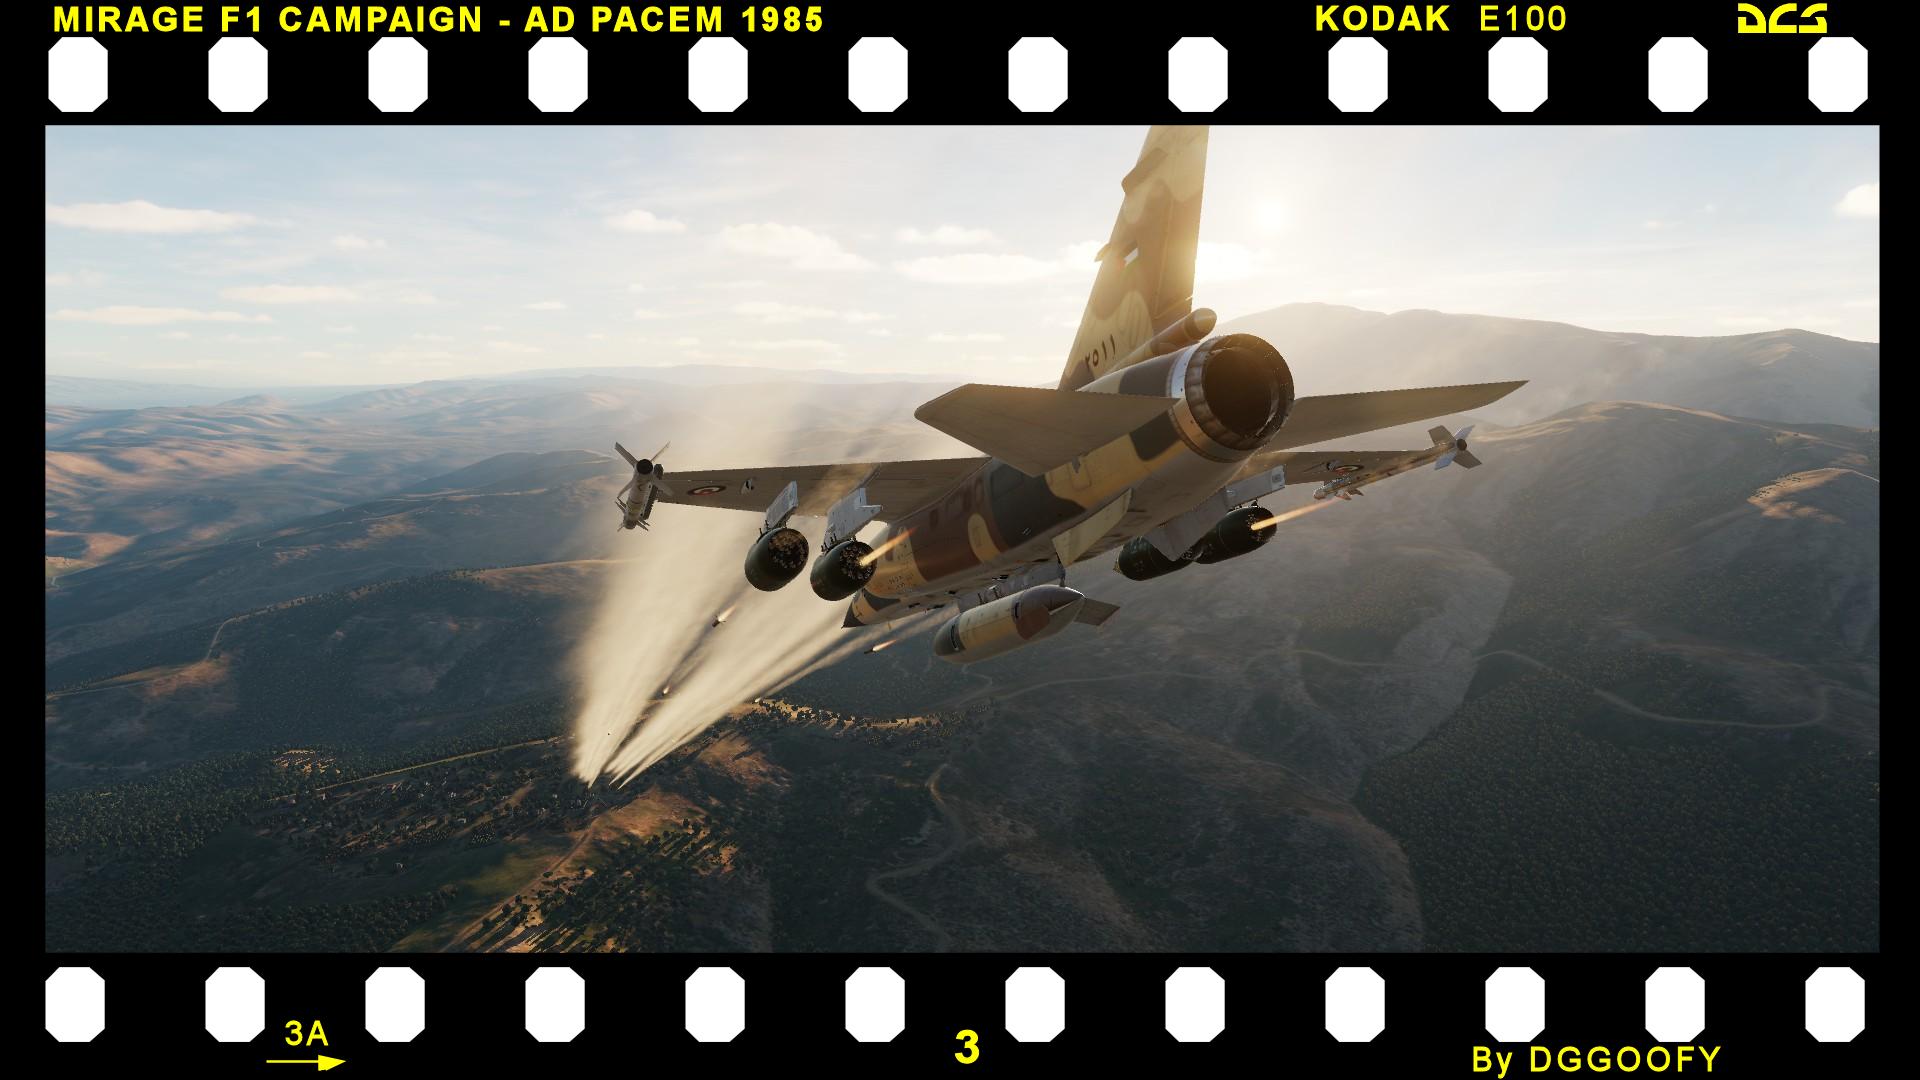 Mirage F1 - Ad Pacem 1985 Campaign